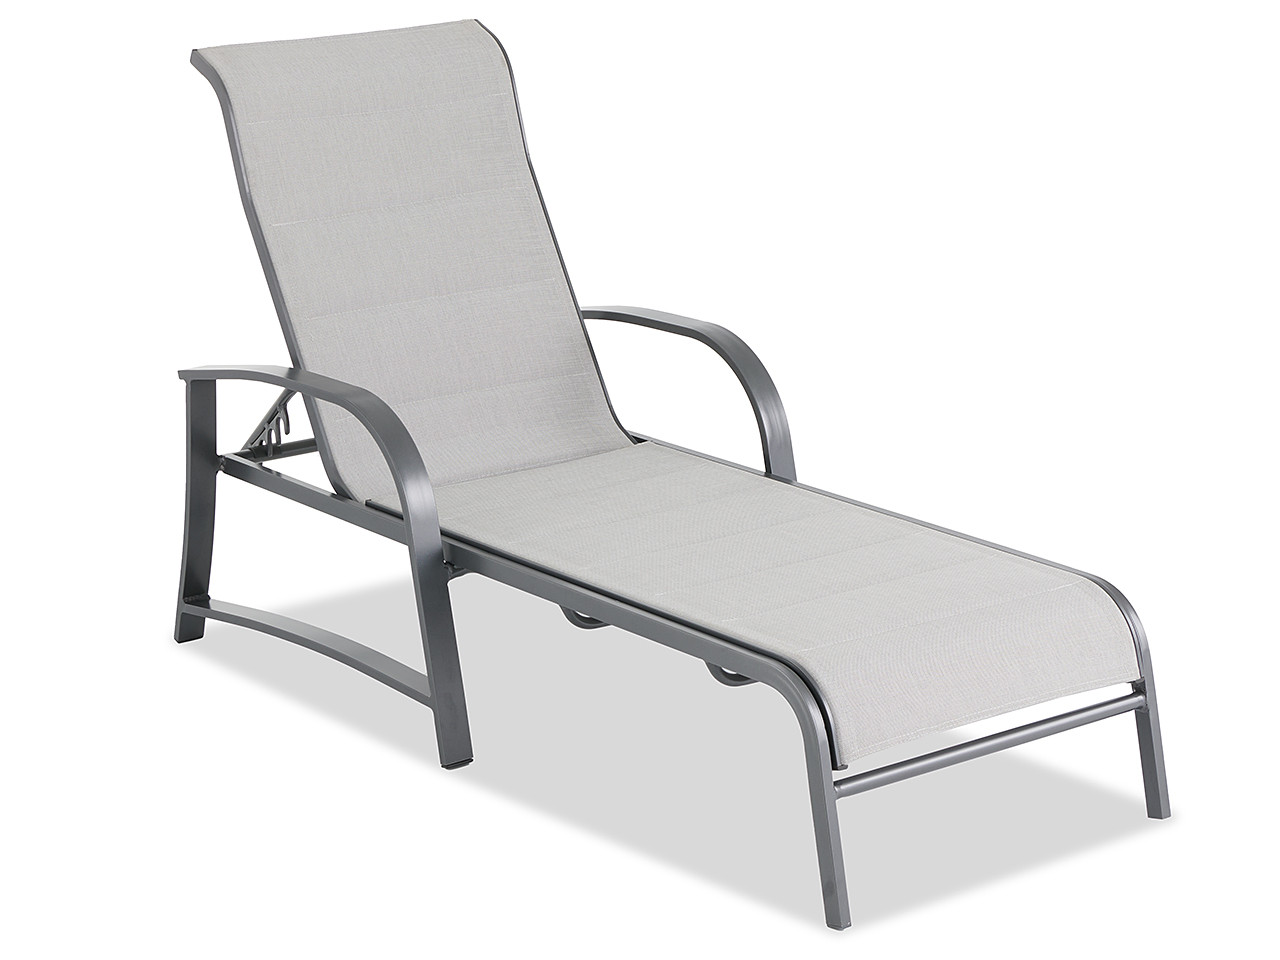 Capri Glimmer Grey Aluminum and Augustine Alloy Padded Sling 3 Pc. Chaise Lounge Set with 24 in. D Table